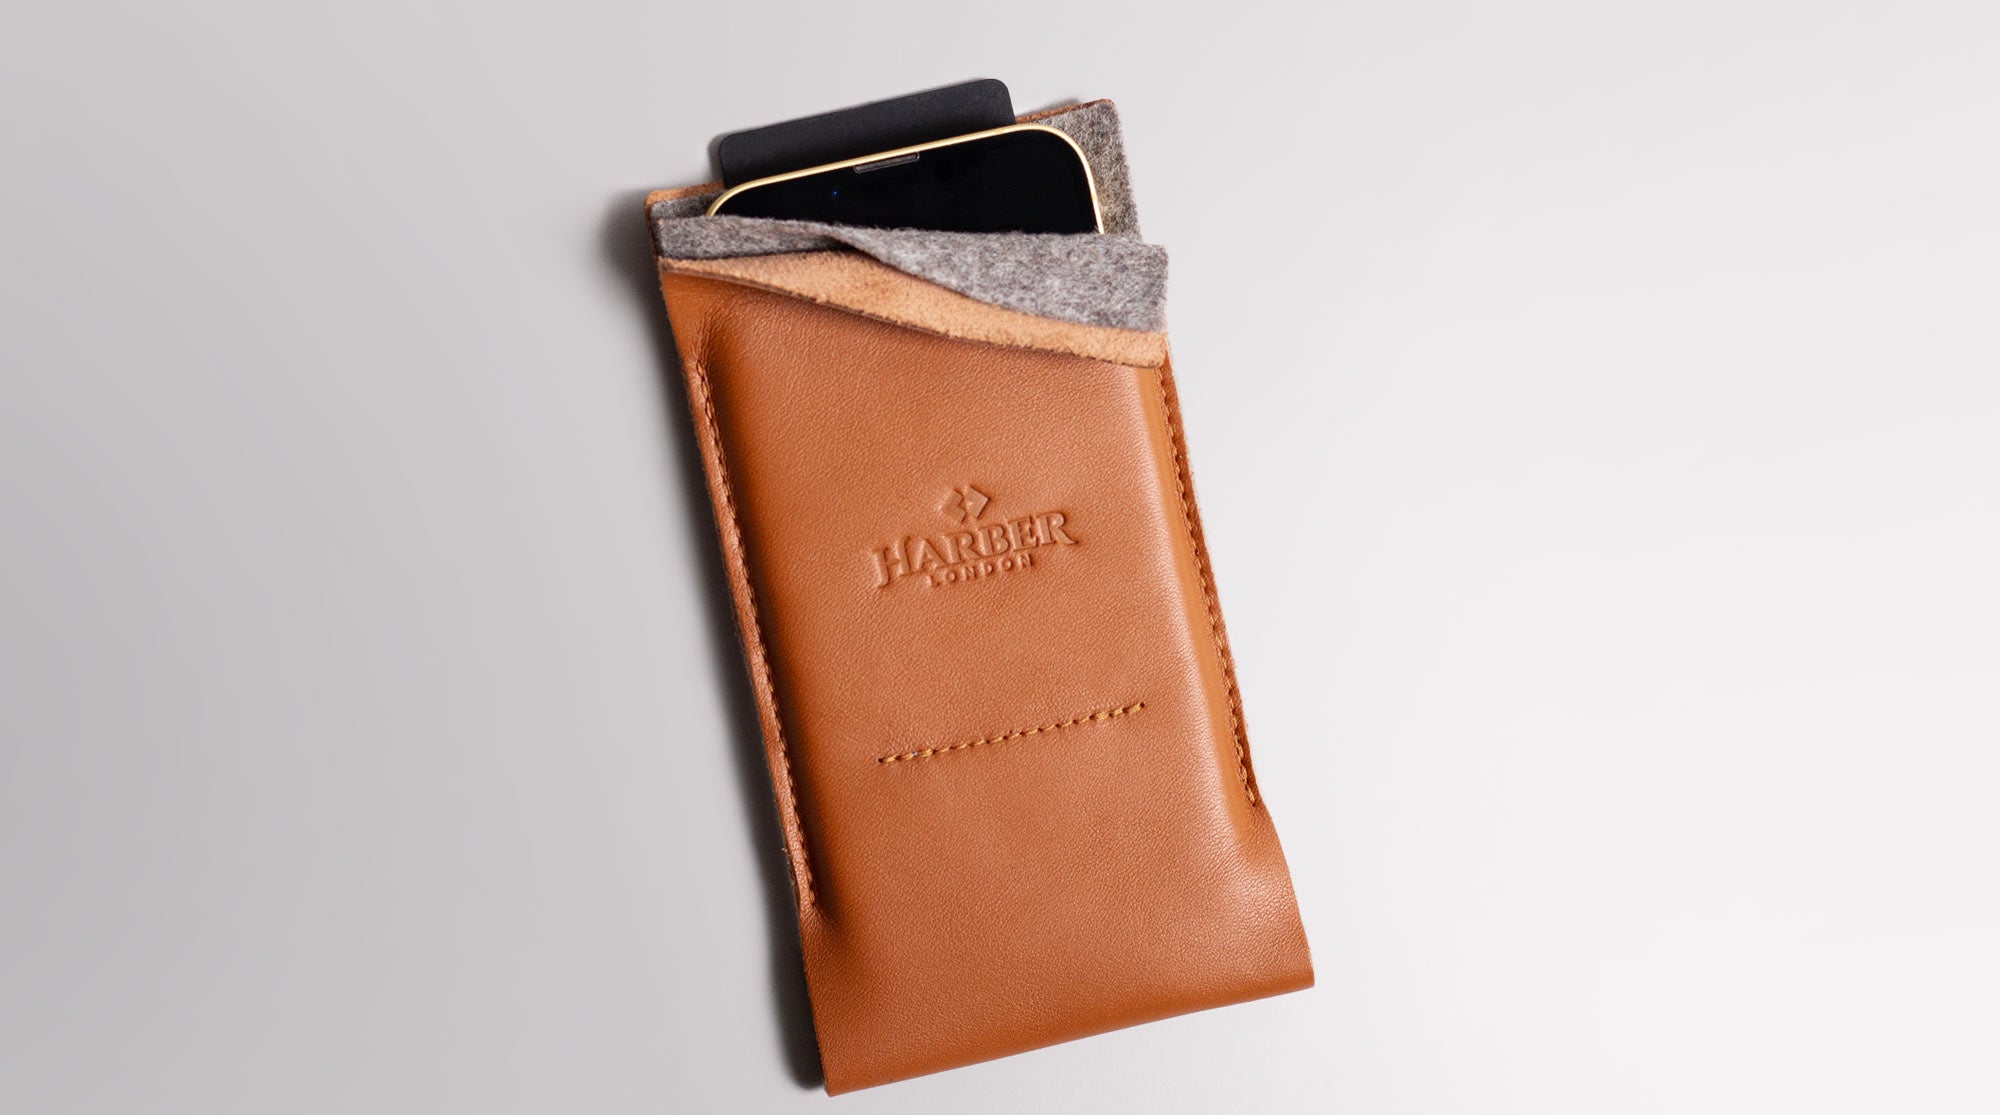 Leather sleeve for iPhone and cards.